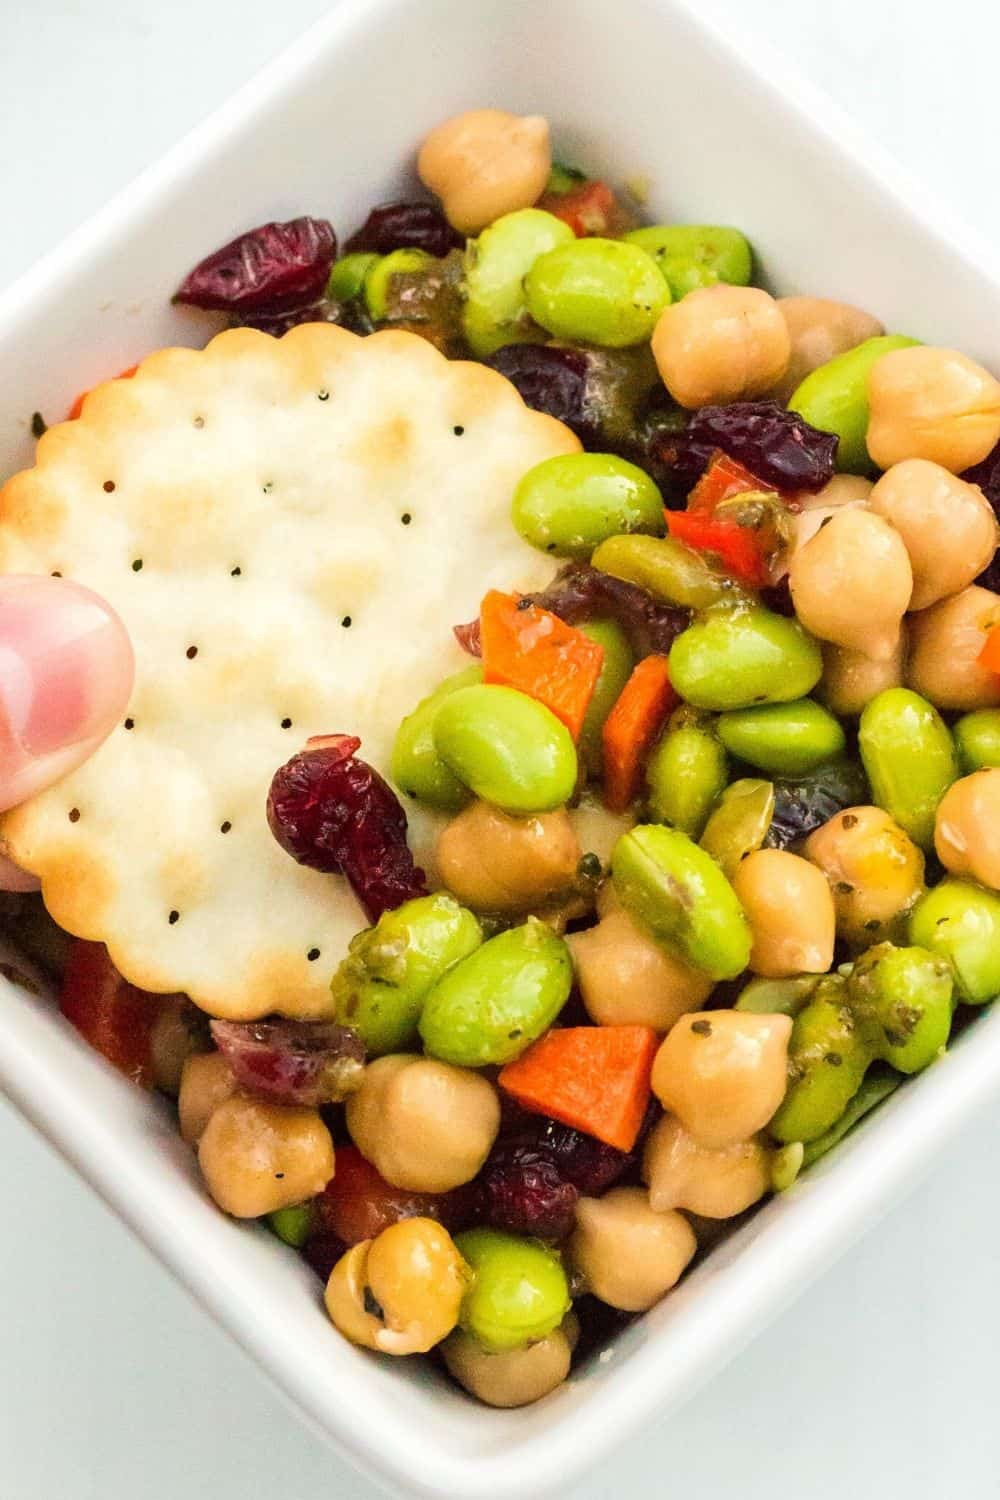 a woman's fingers dip a cracker into a bowl of chickpea and edamame salad